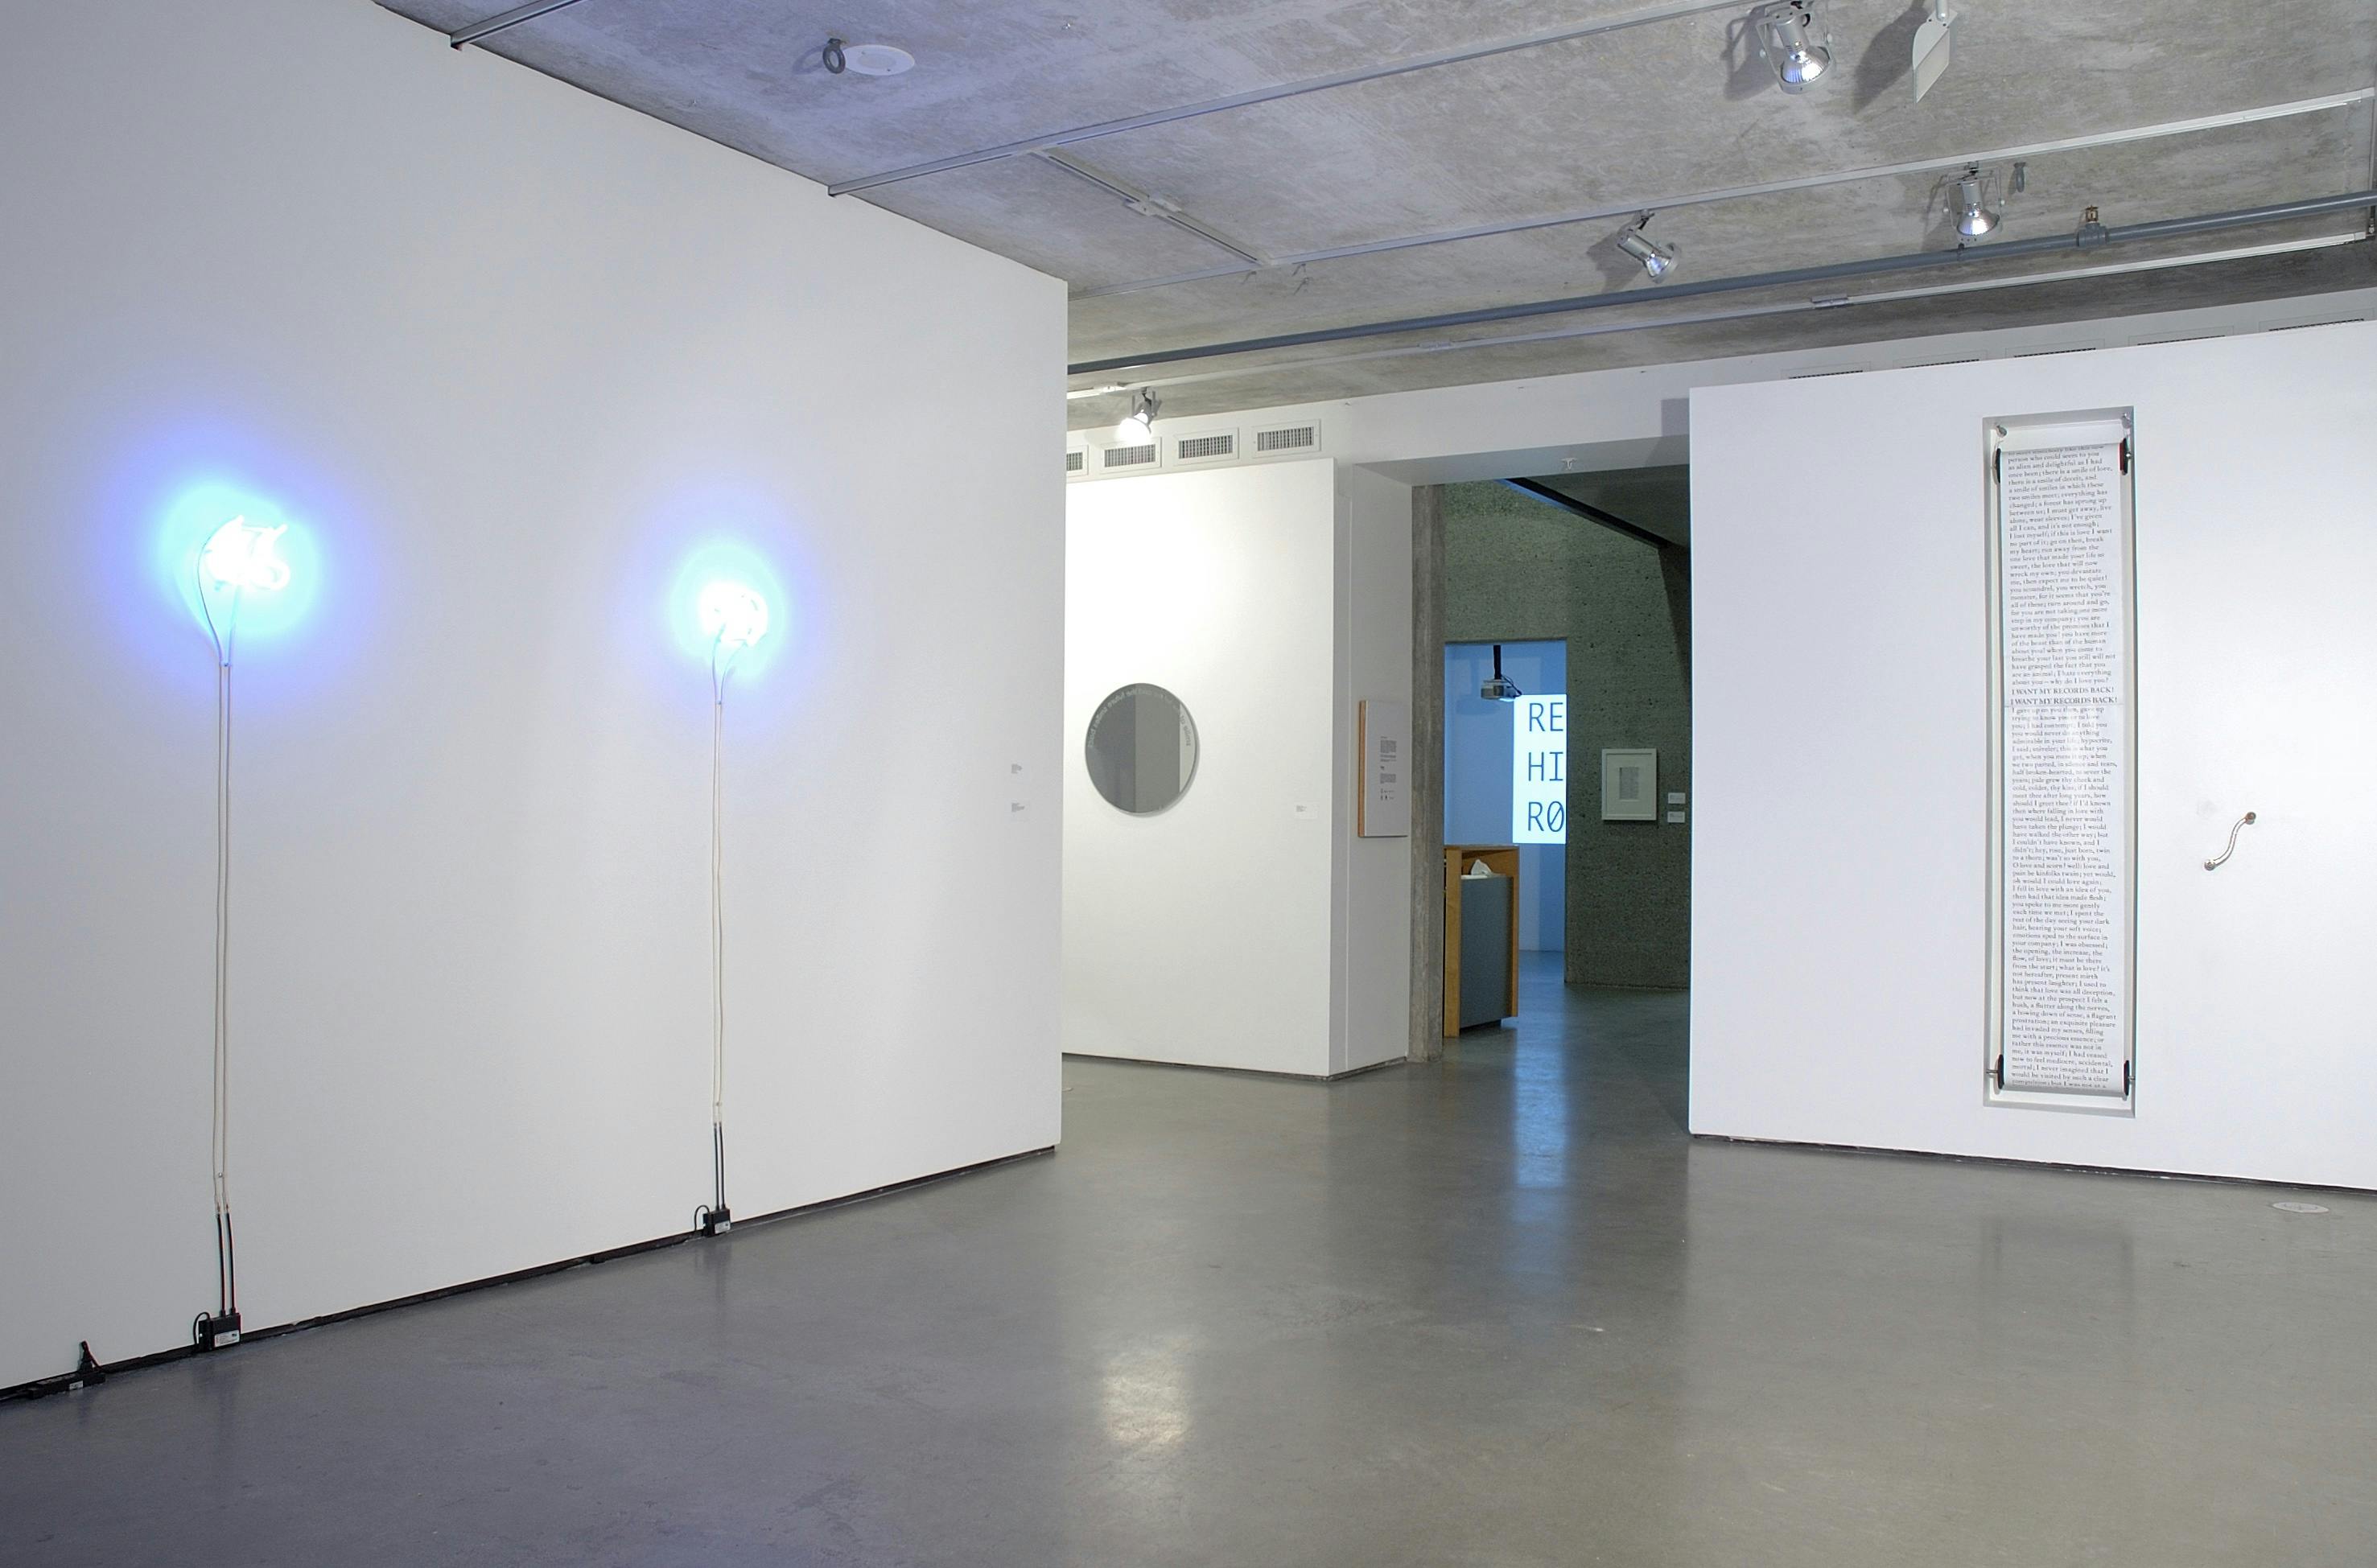 This is an installation shot of a group exhibition titled Concrete Language. A tall and narrow white paper is mounted on the wall beside the gallery entrance. A neon sign is placed on the other wall. 